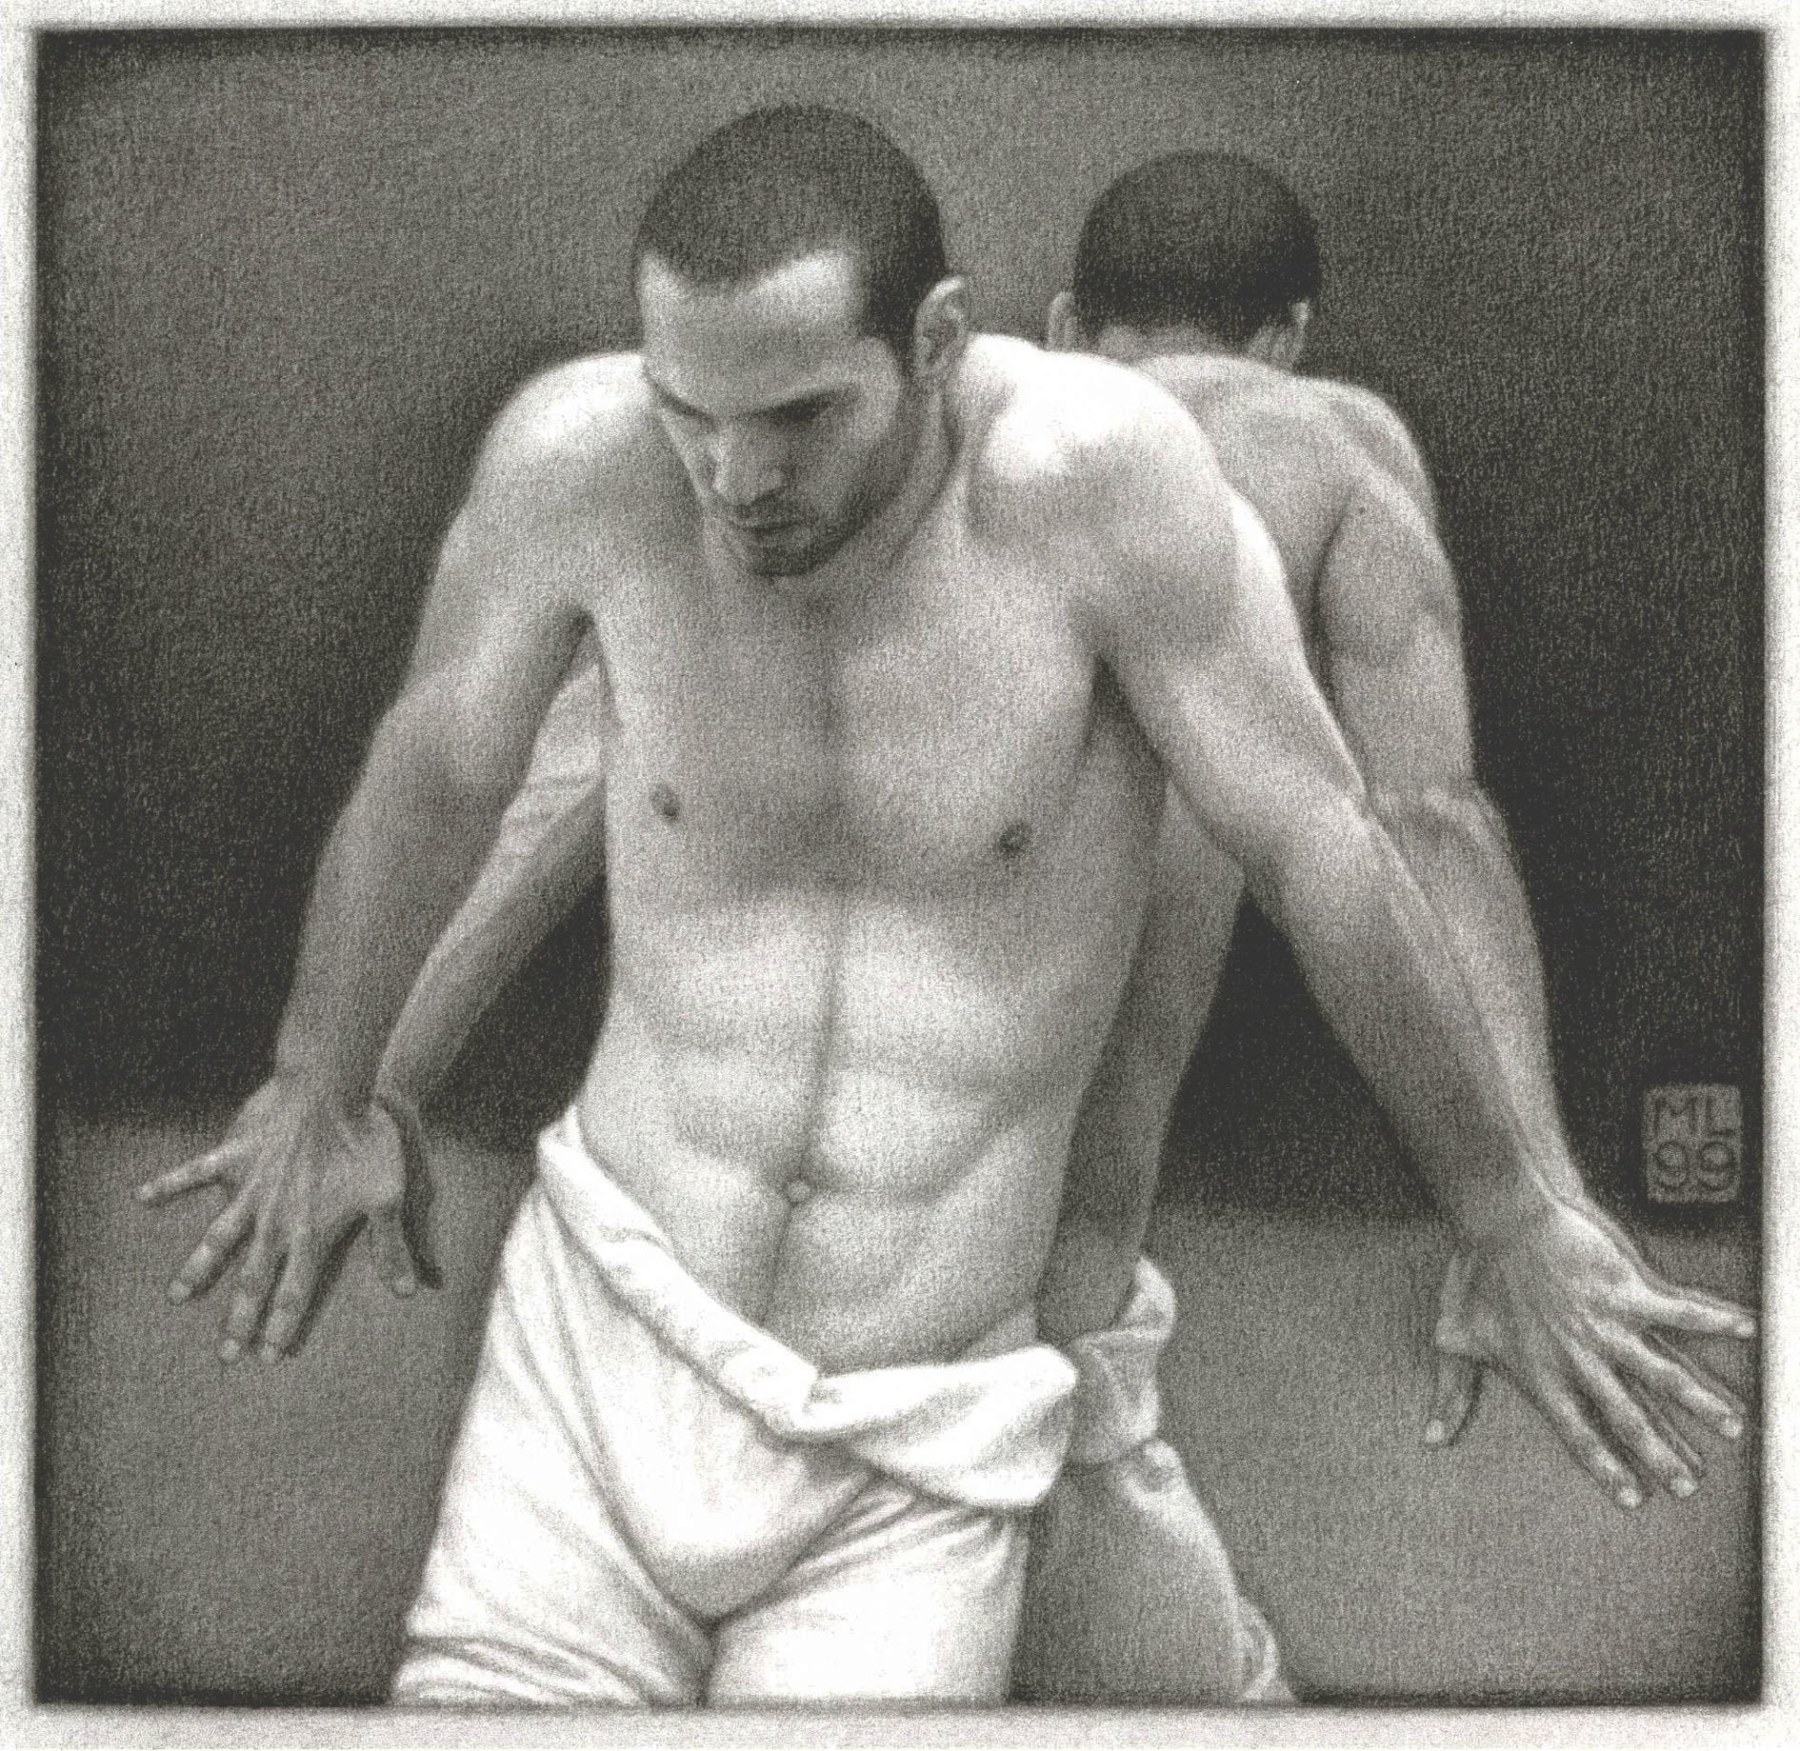 Michael Leonard, Back To Back, 1999, graphite pencil on paper, 8 x 8 1/4 inches